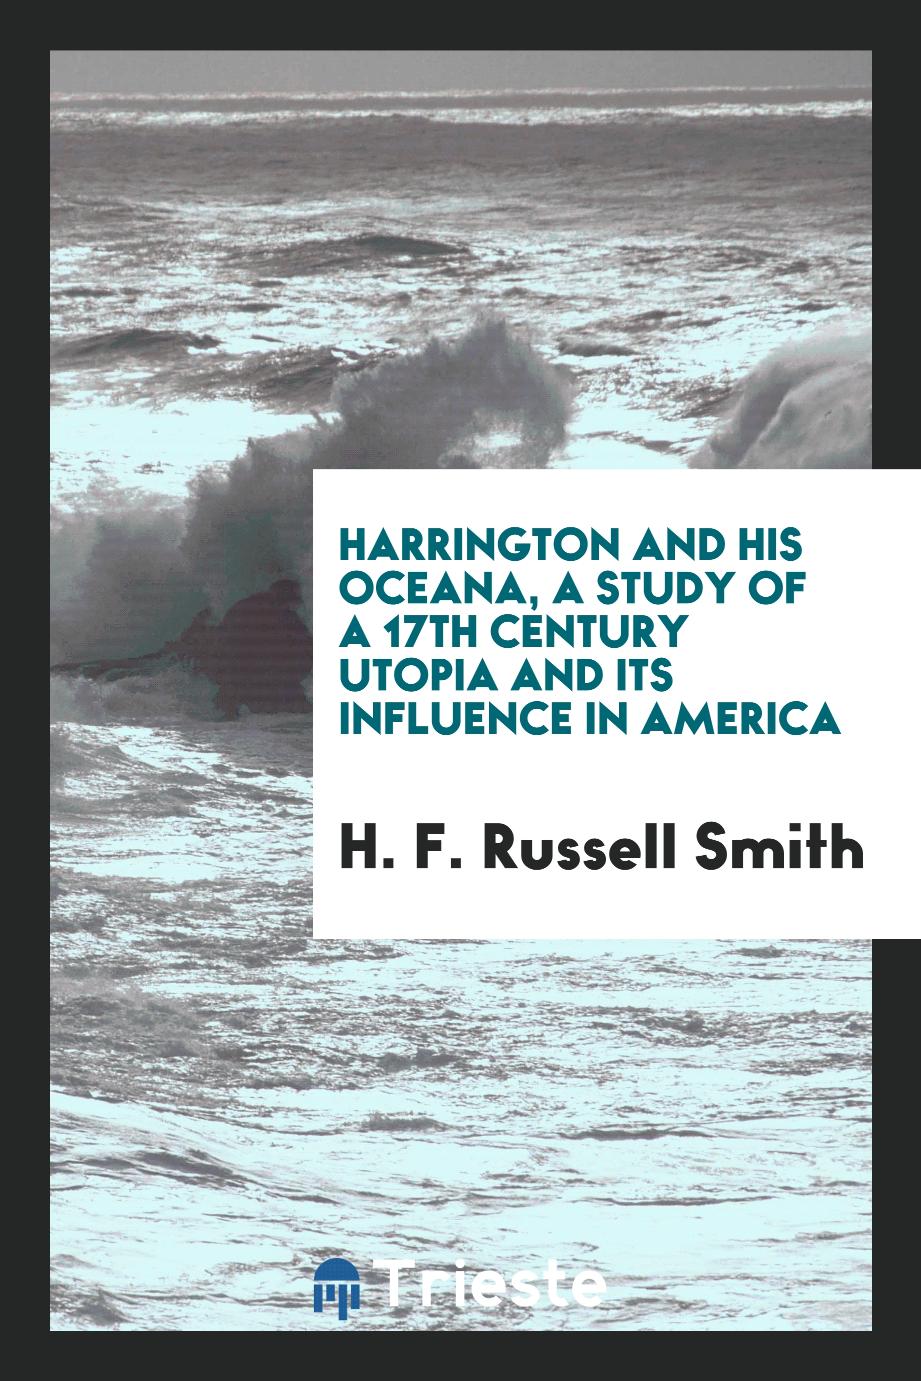 Harrington and his Oceana, a study of a 17th century Utopia and its influence in America